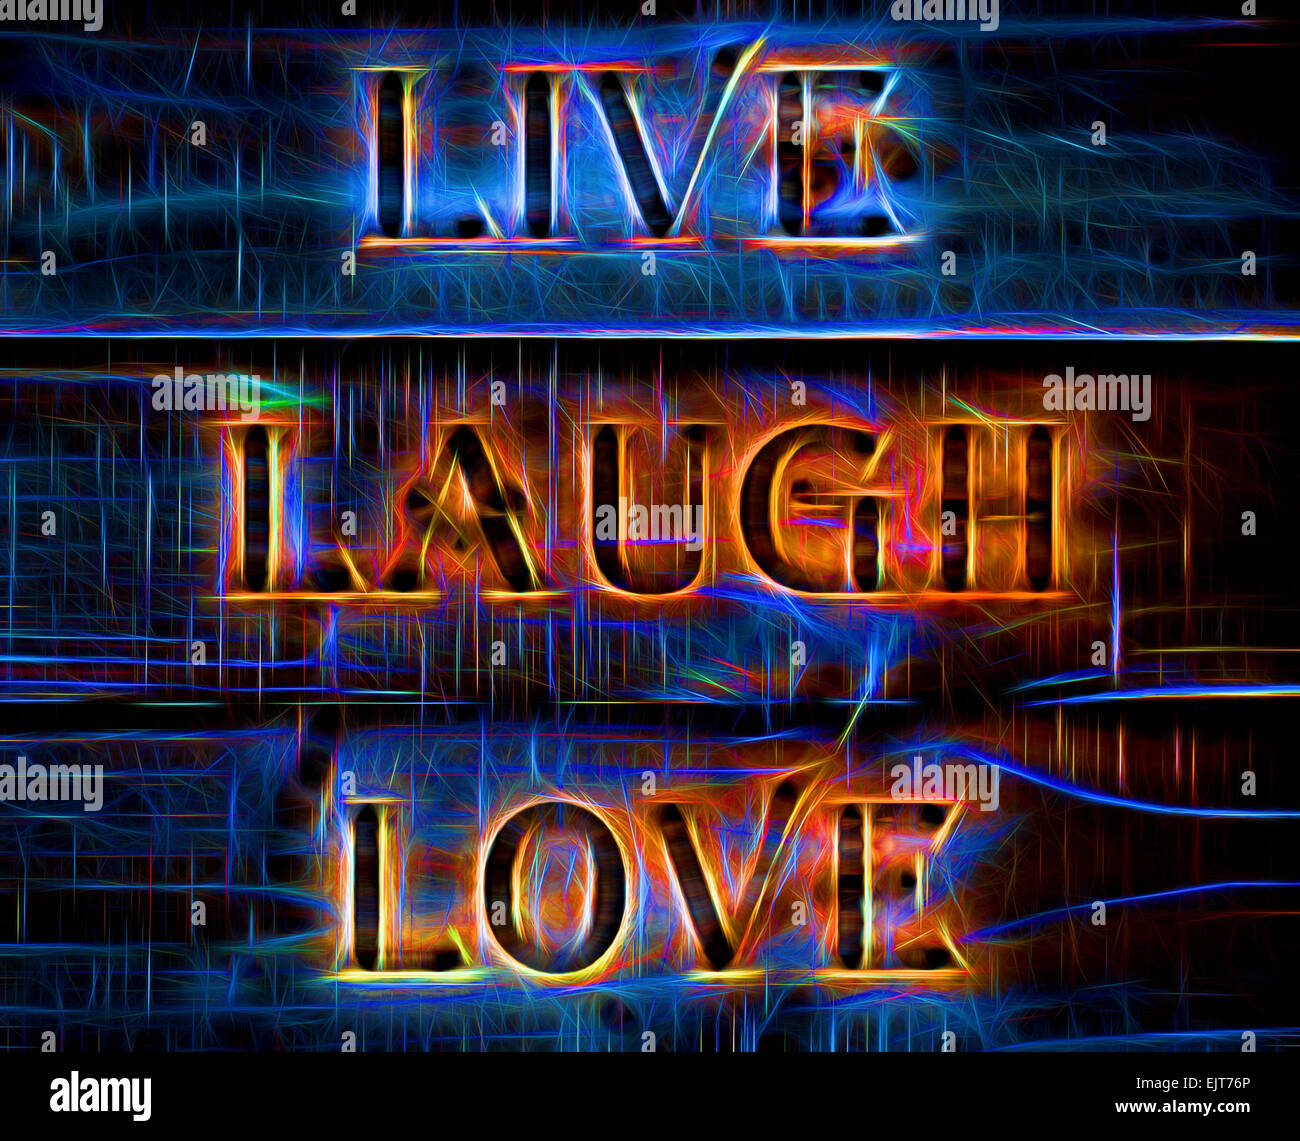 Neon Lights Quotes Images Browse 8645 Stock Photos  Vectors Free  Download with Trial  Shutterstock